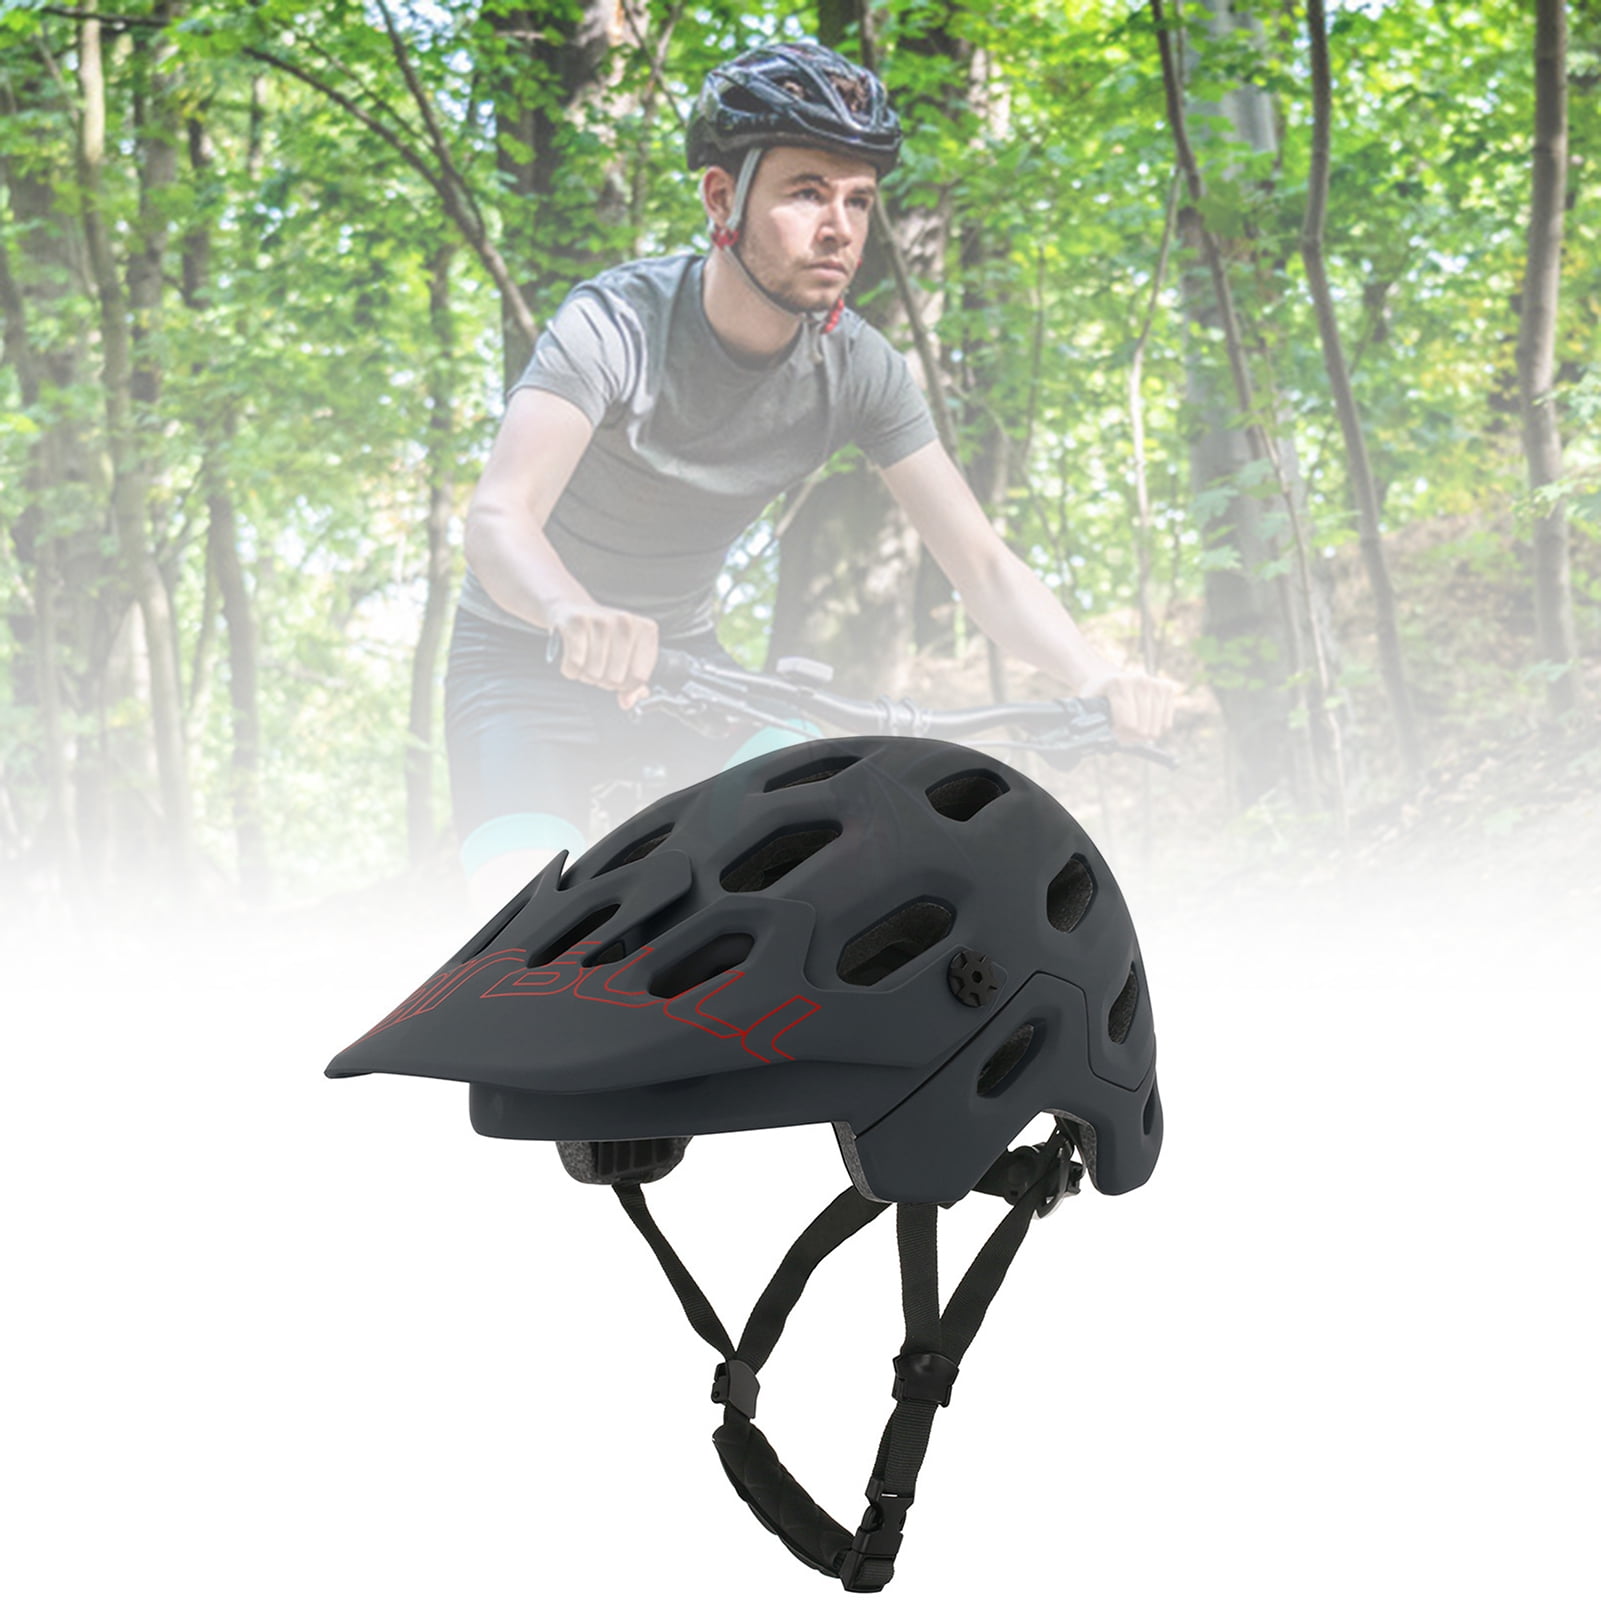 CAIRBULL Adjustable Mountain Bicycle Helmet MTB Road Cycling Bike Sports Safety 